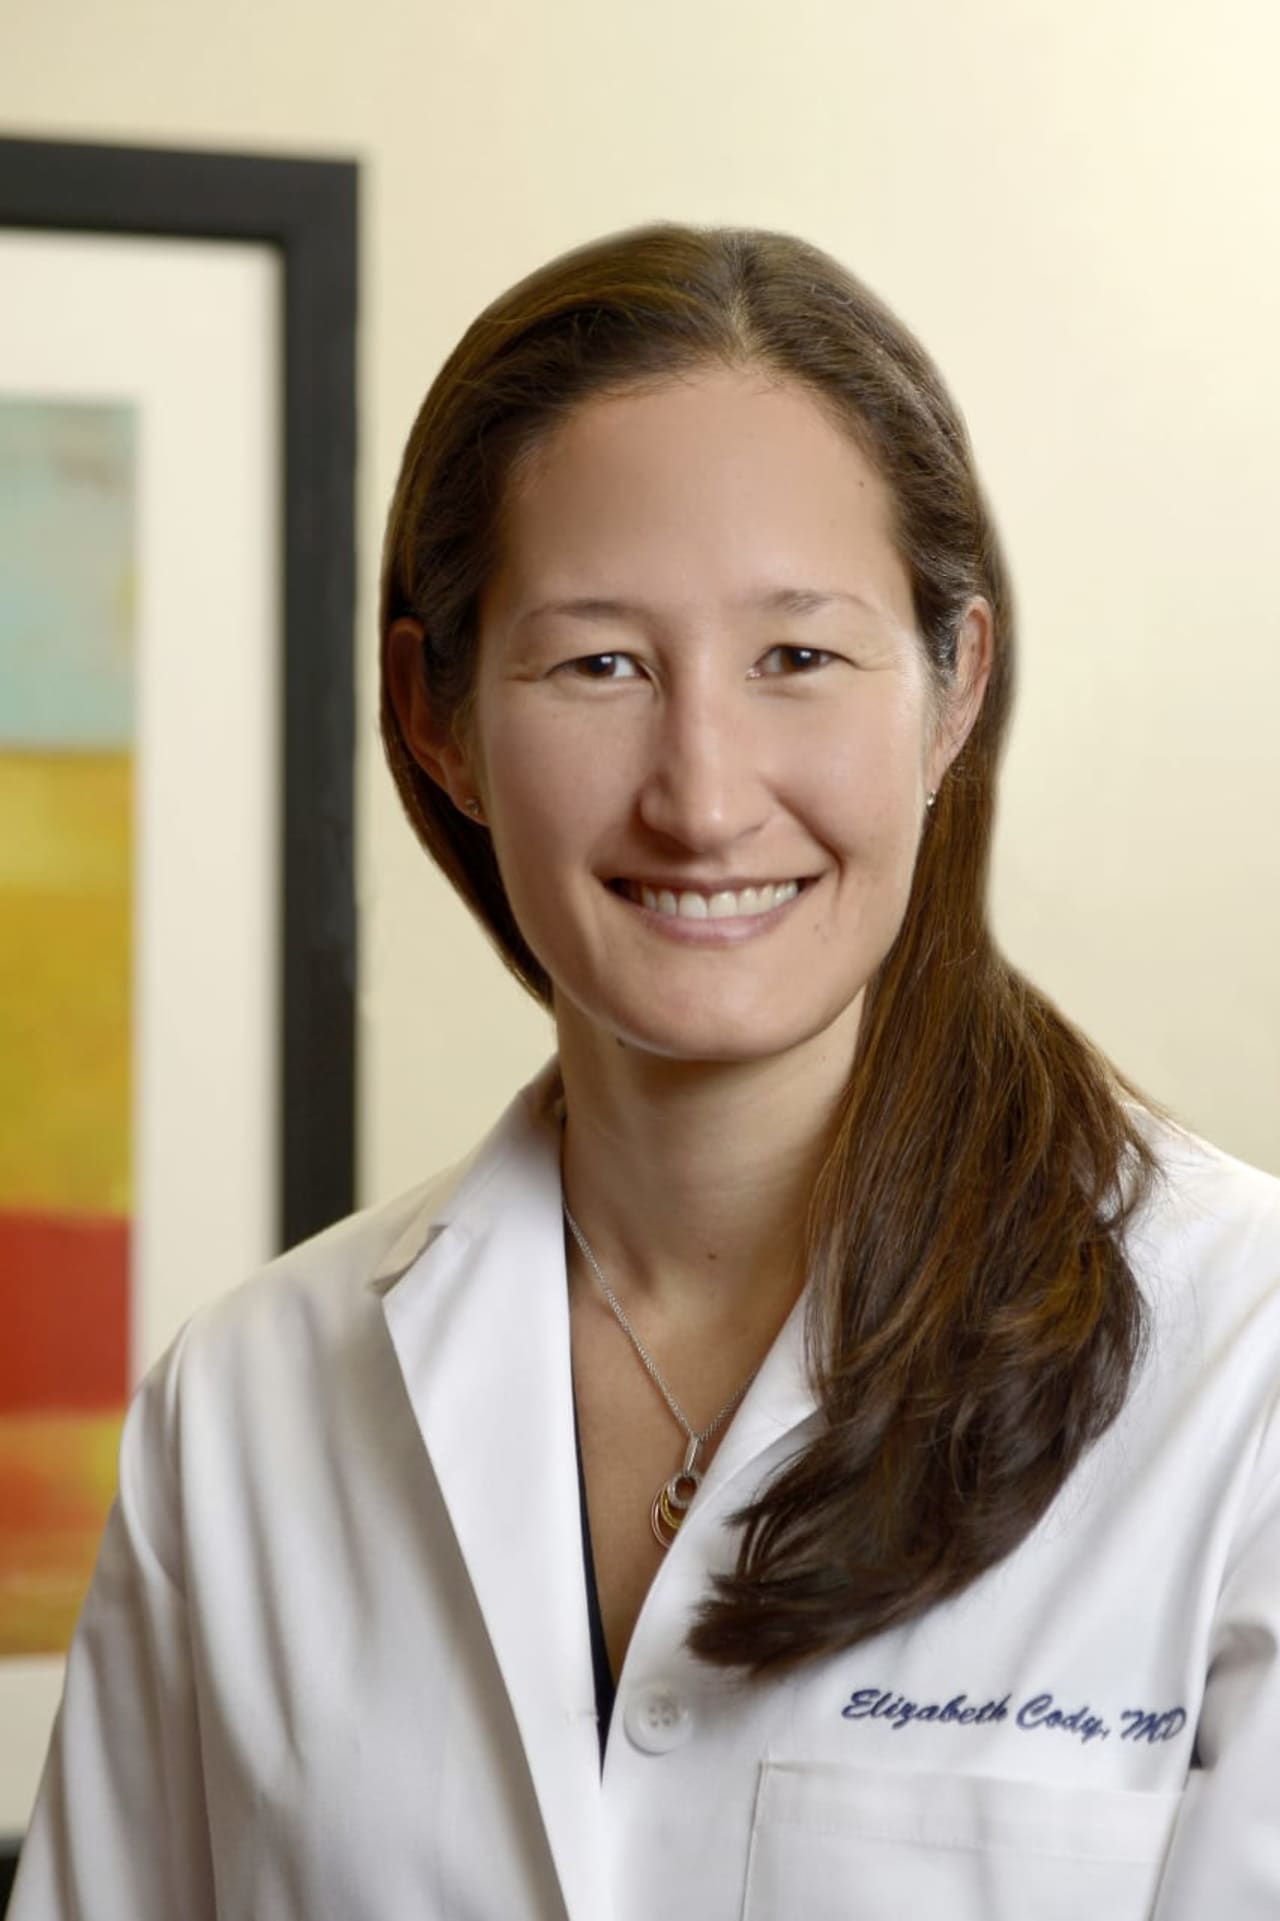 Elizabeth Cody, MD, foot and ankle surgeon at HSS.